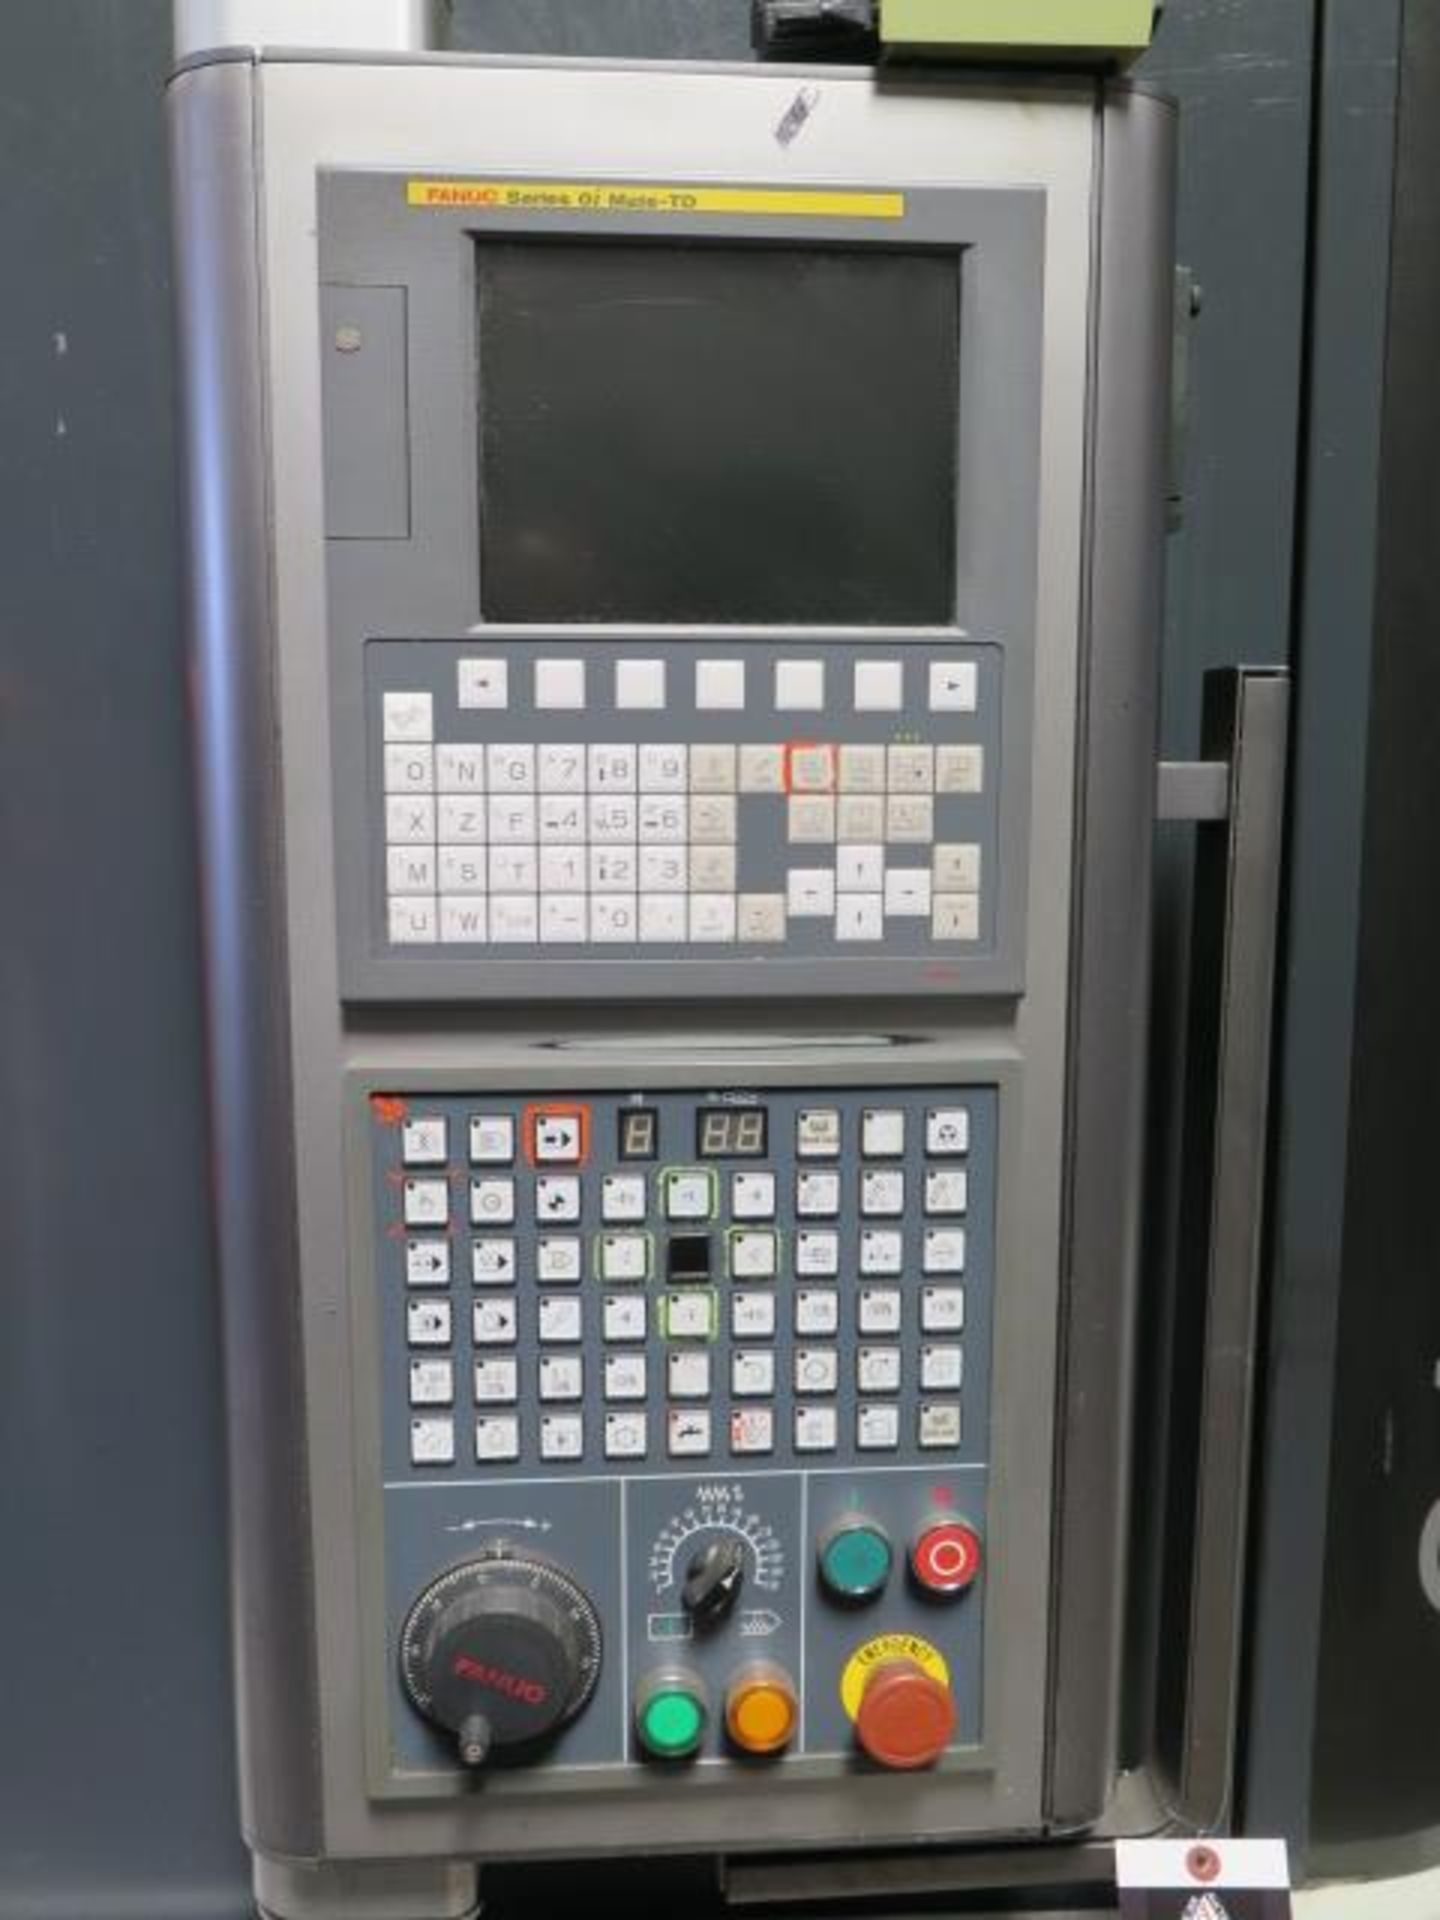 2011 SMTCL Shenyang OAK3675 CNC Turning Center s/n A31010027 w/ Fanuc 0i Mate-TD Controls,SOLD AS IS - Image 11 of 14